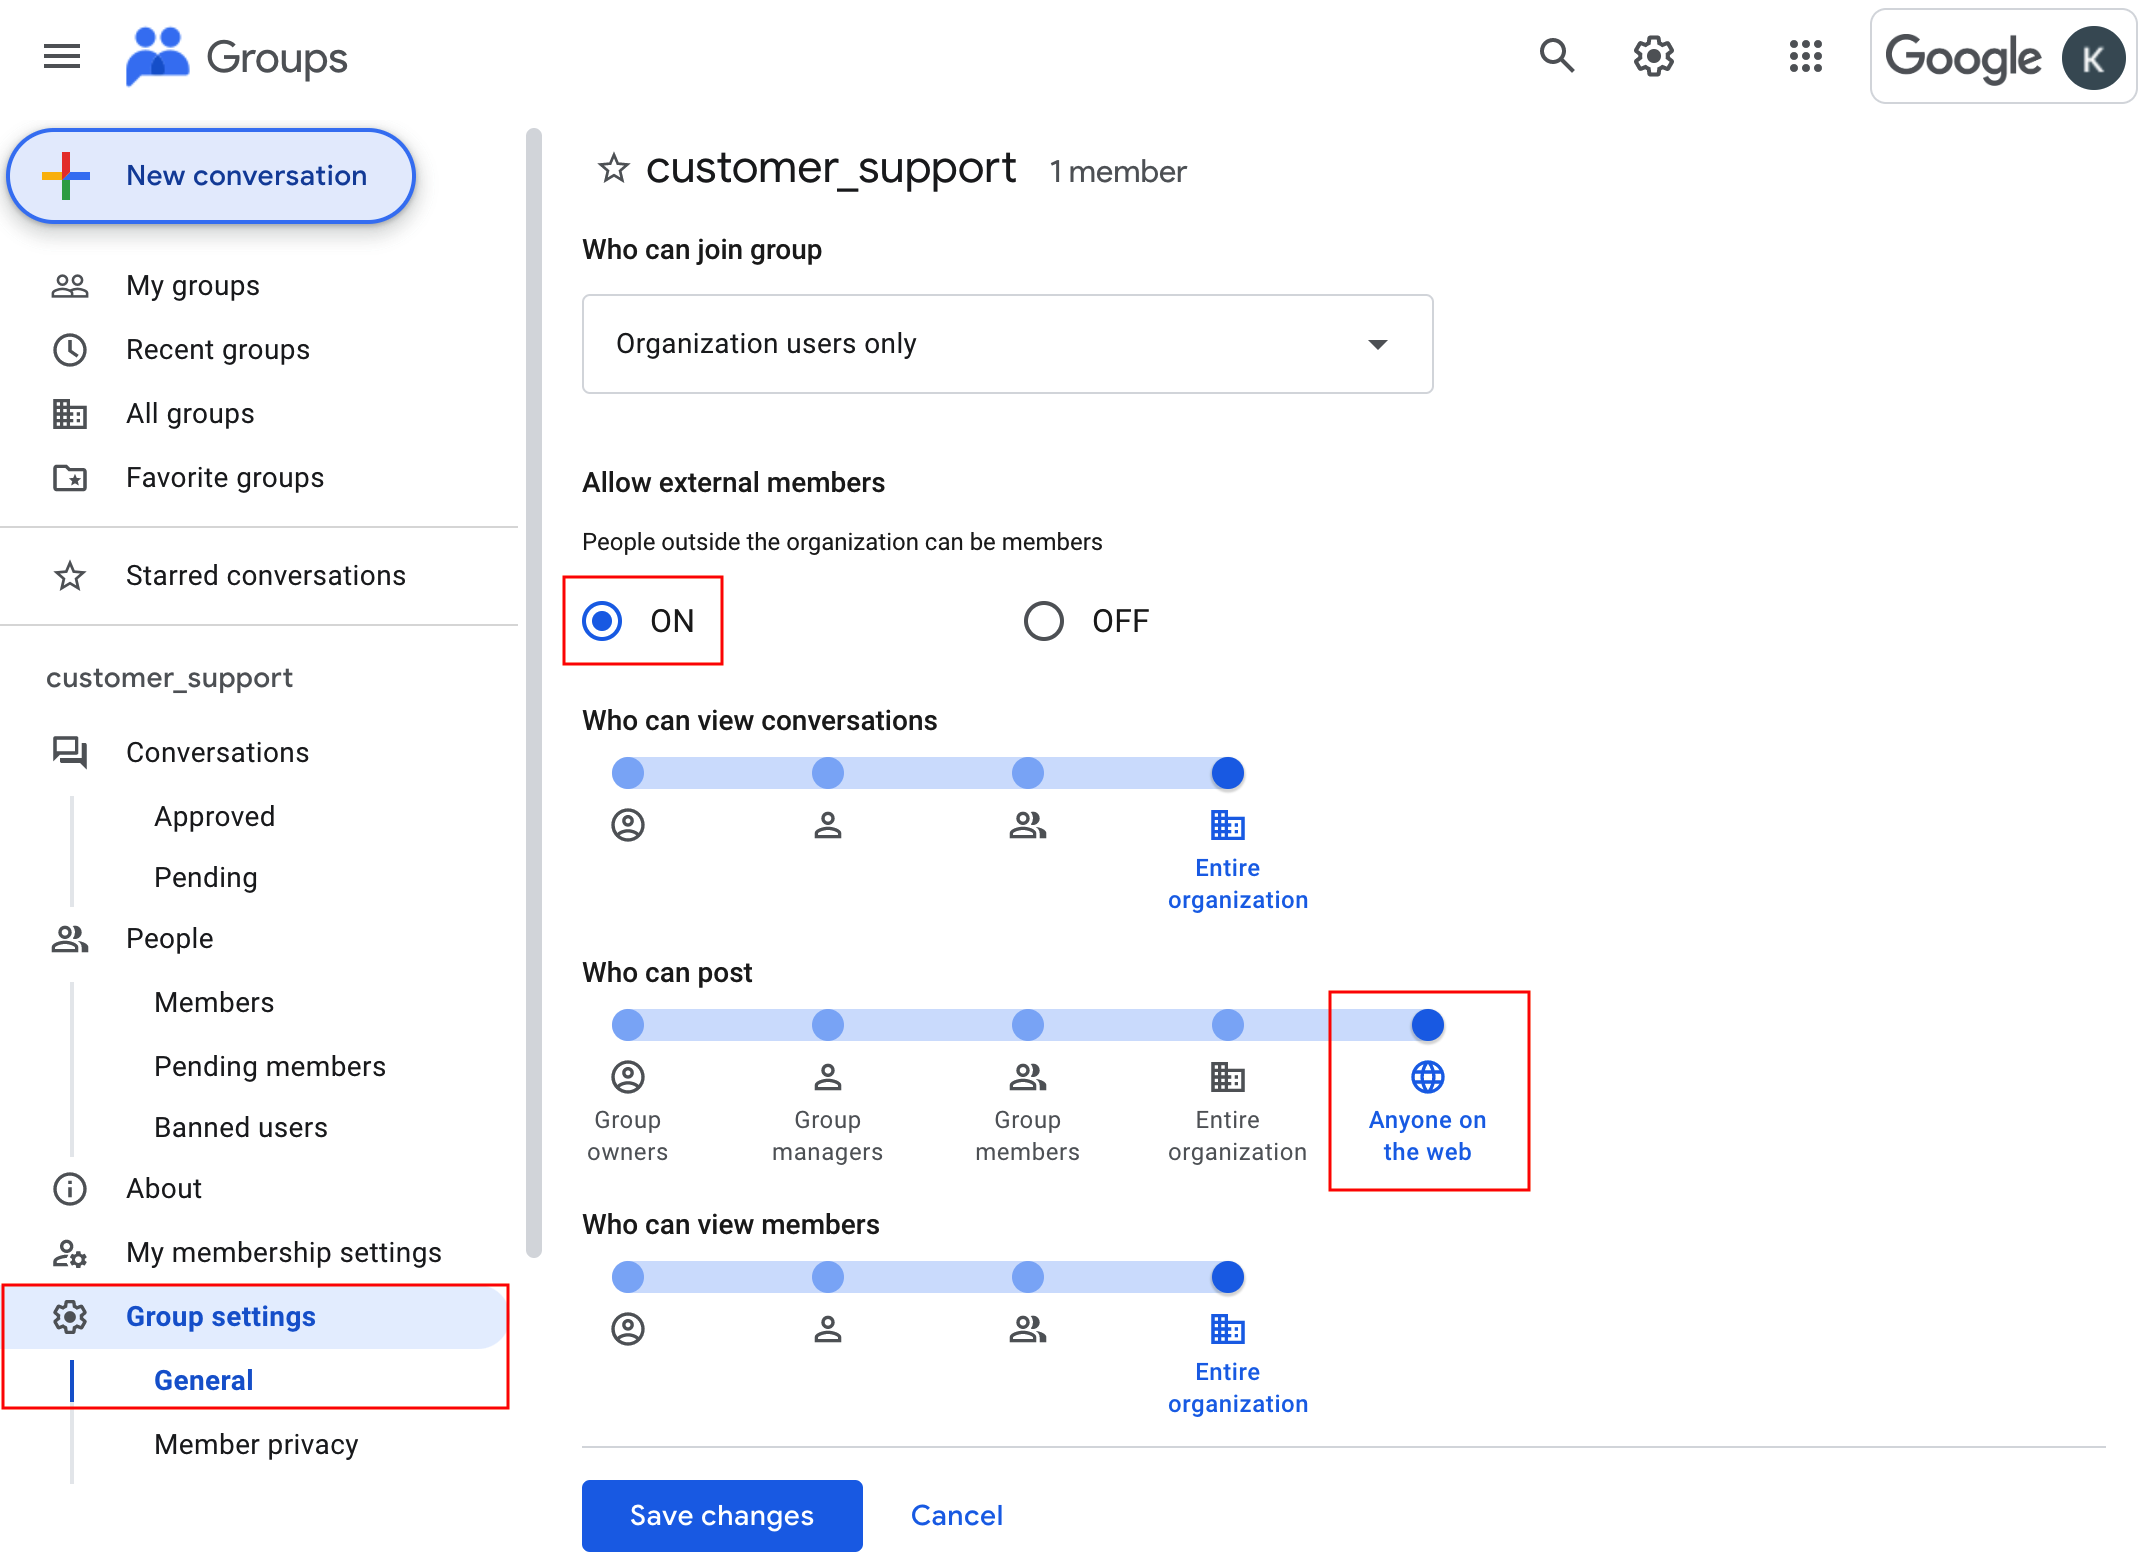 How to set up a Google Group and customize its settings